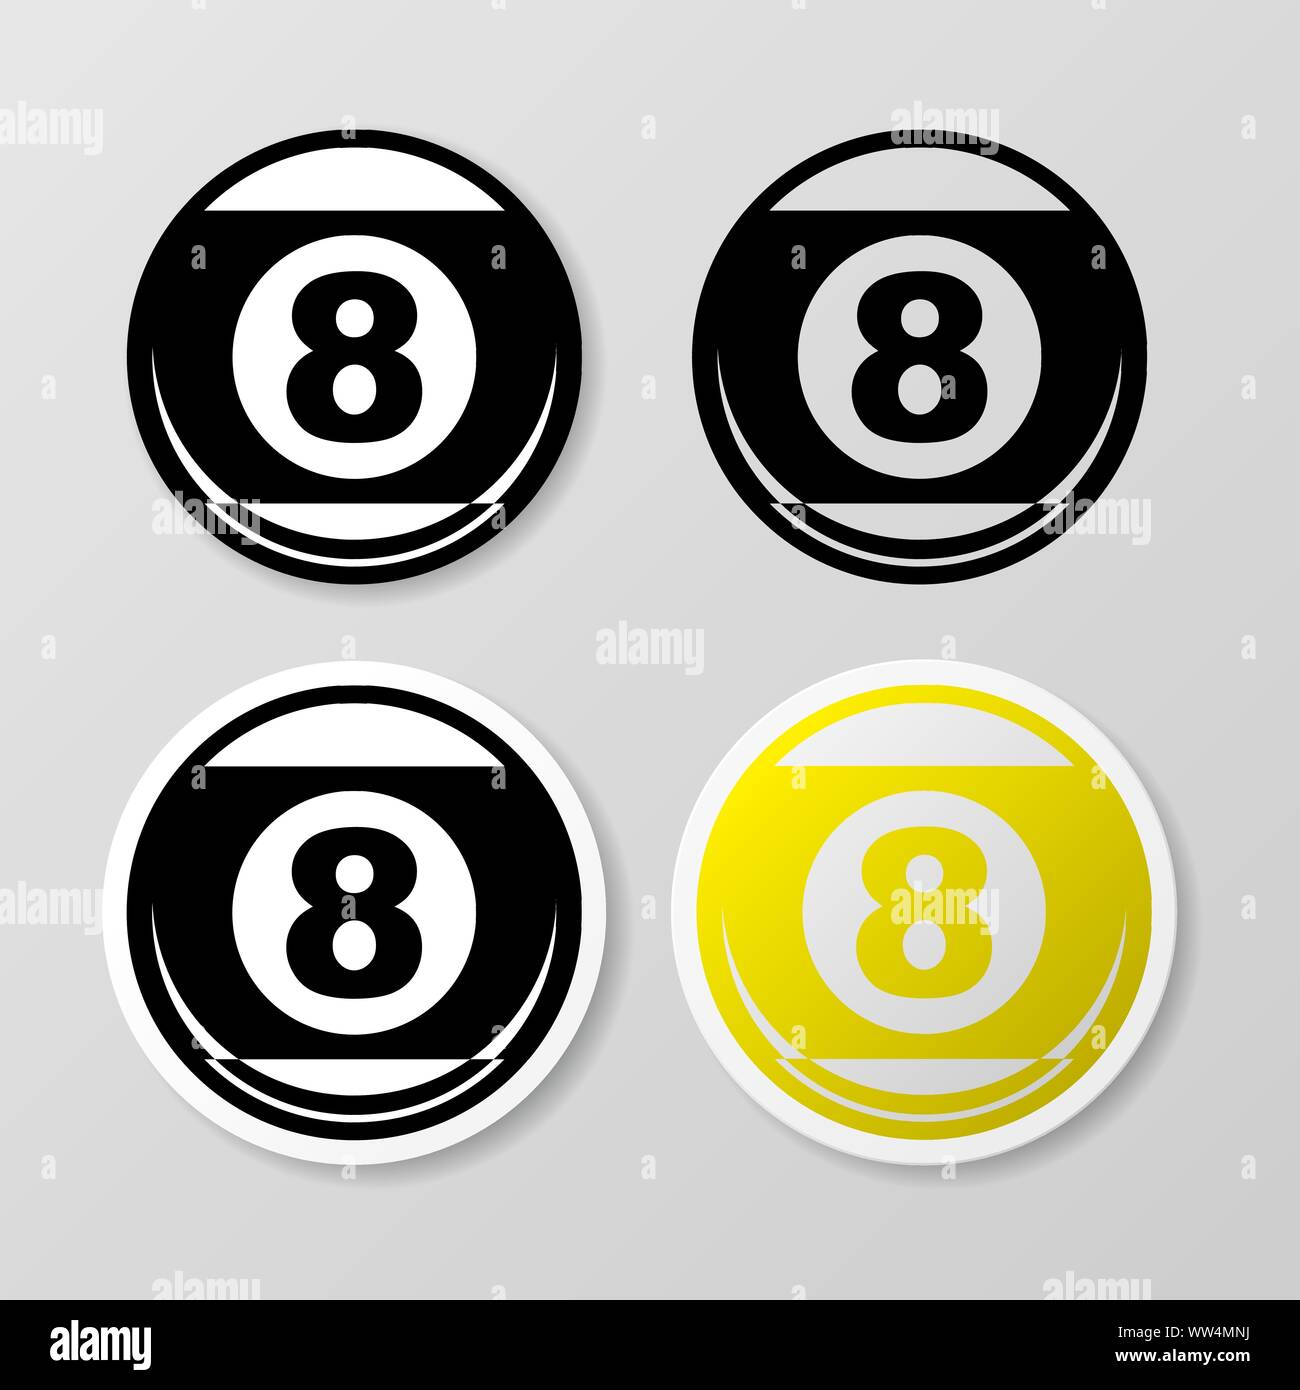 Four black billiards ball stickers isolated on gray background Stock Vector